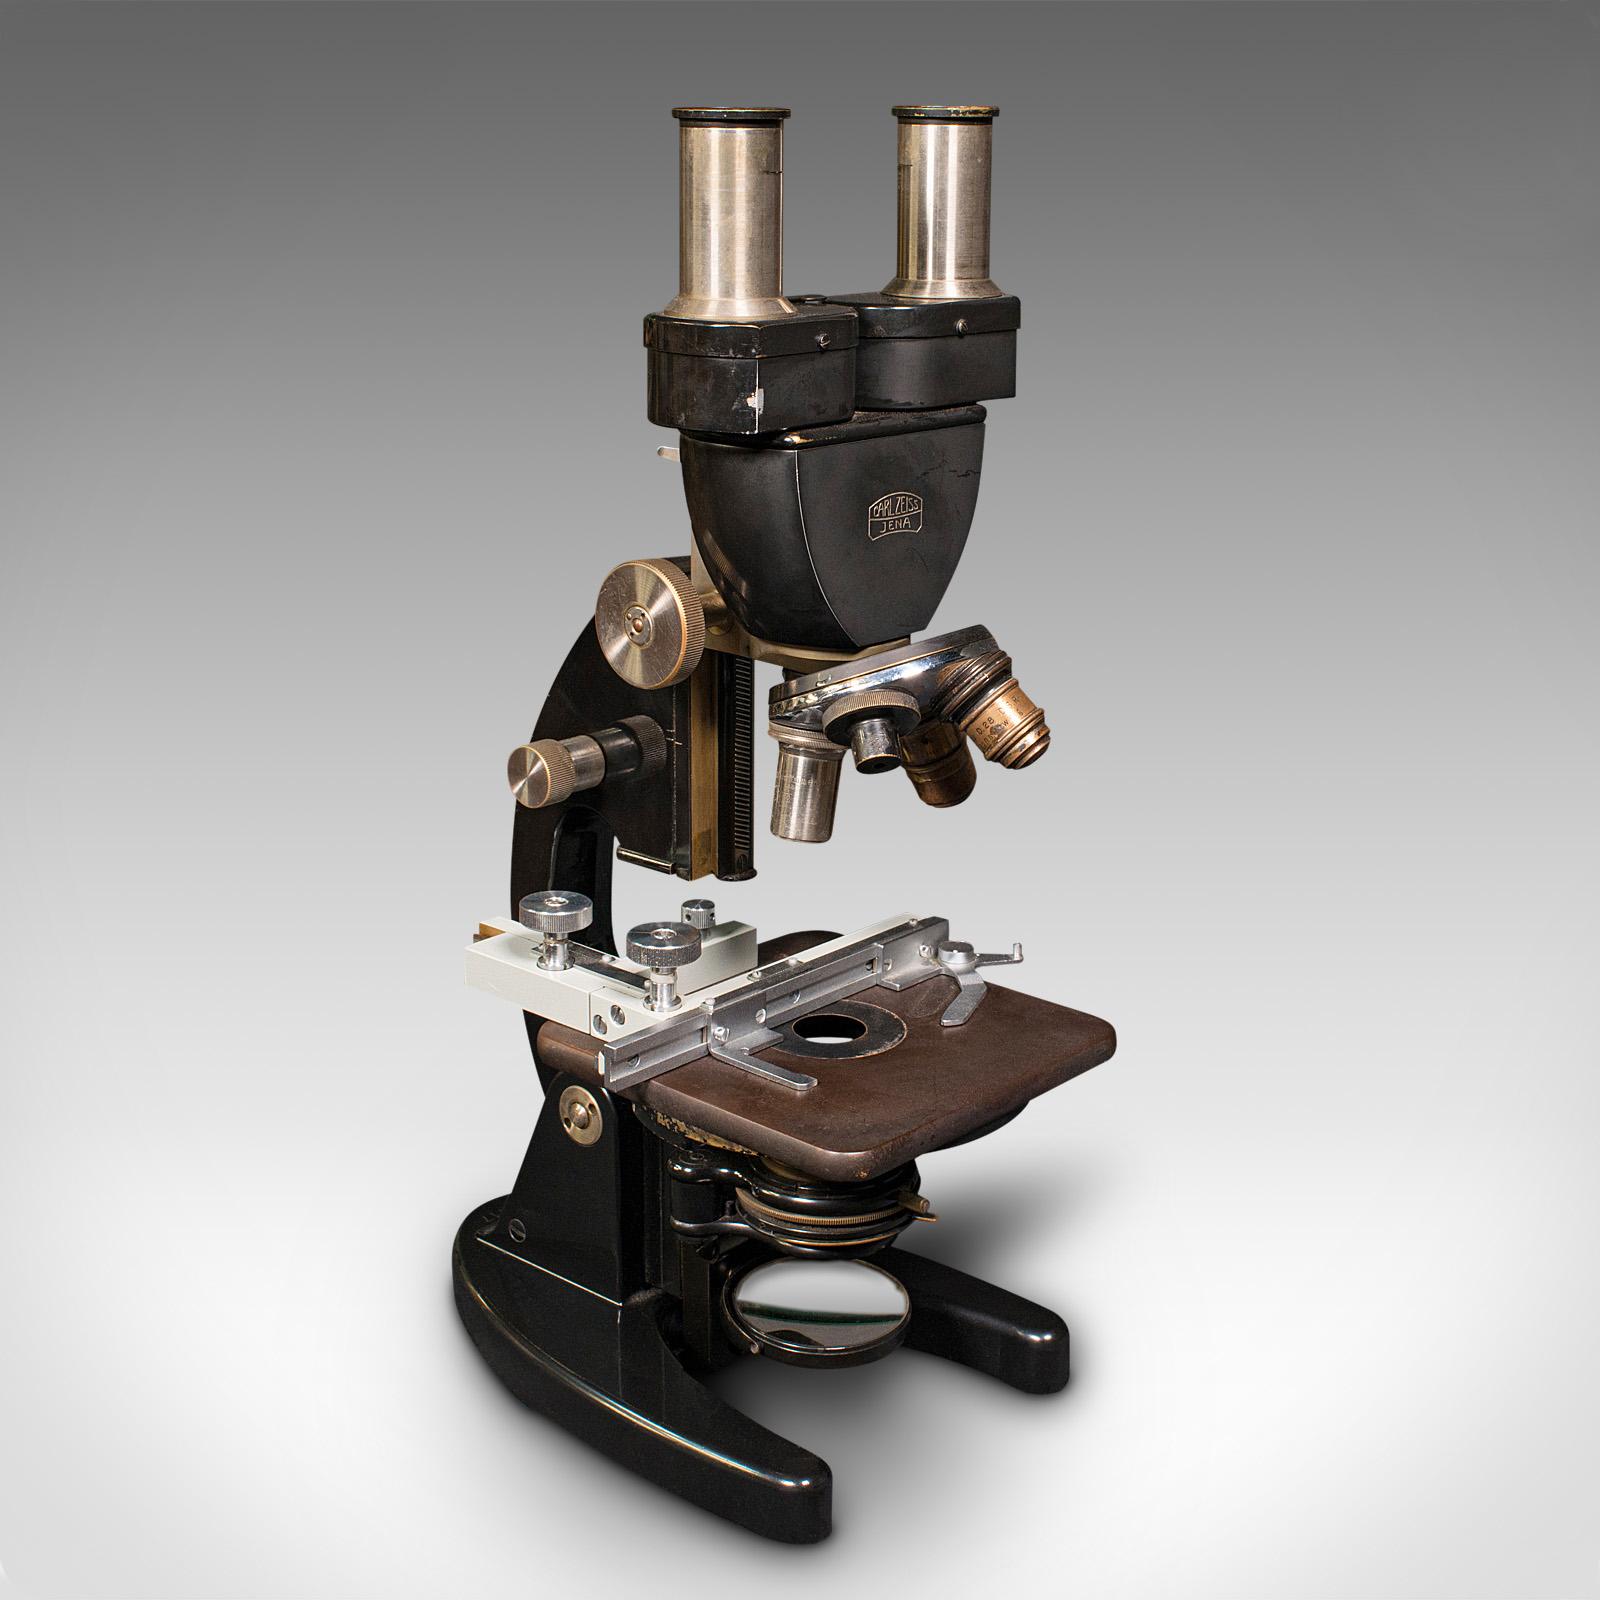 This is a vintage laboratory microscope. A German, enamelled metal scientific instrument by Carl Zeiss Jena, dating to the late 20th century, circa 1970.

Delightfully presented within a robust case with numerous accessories.
Displays a desirable